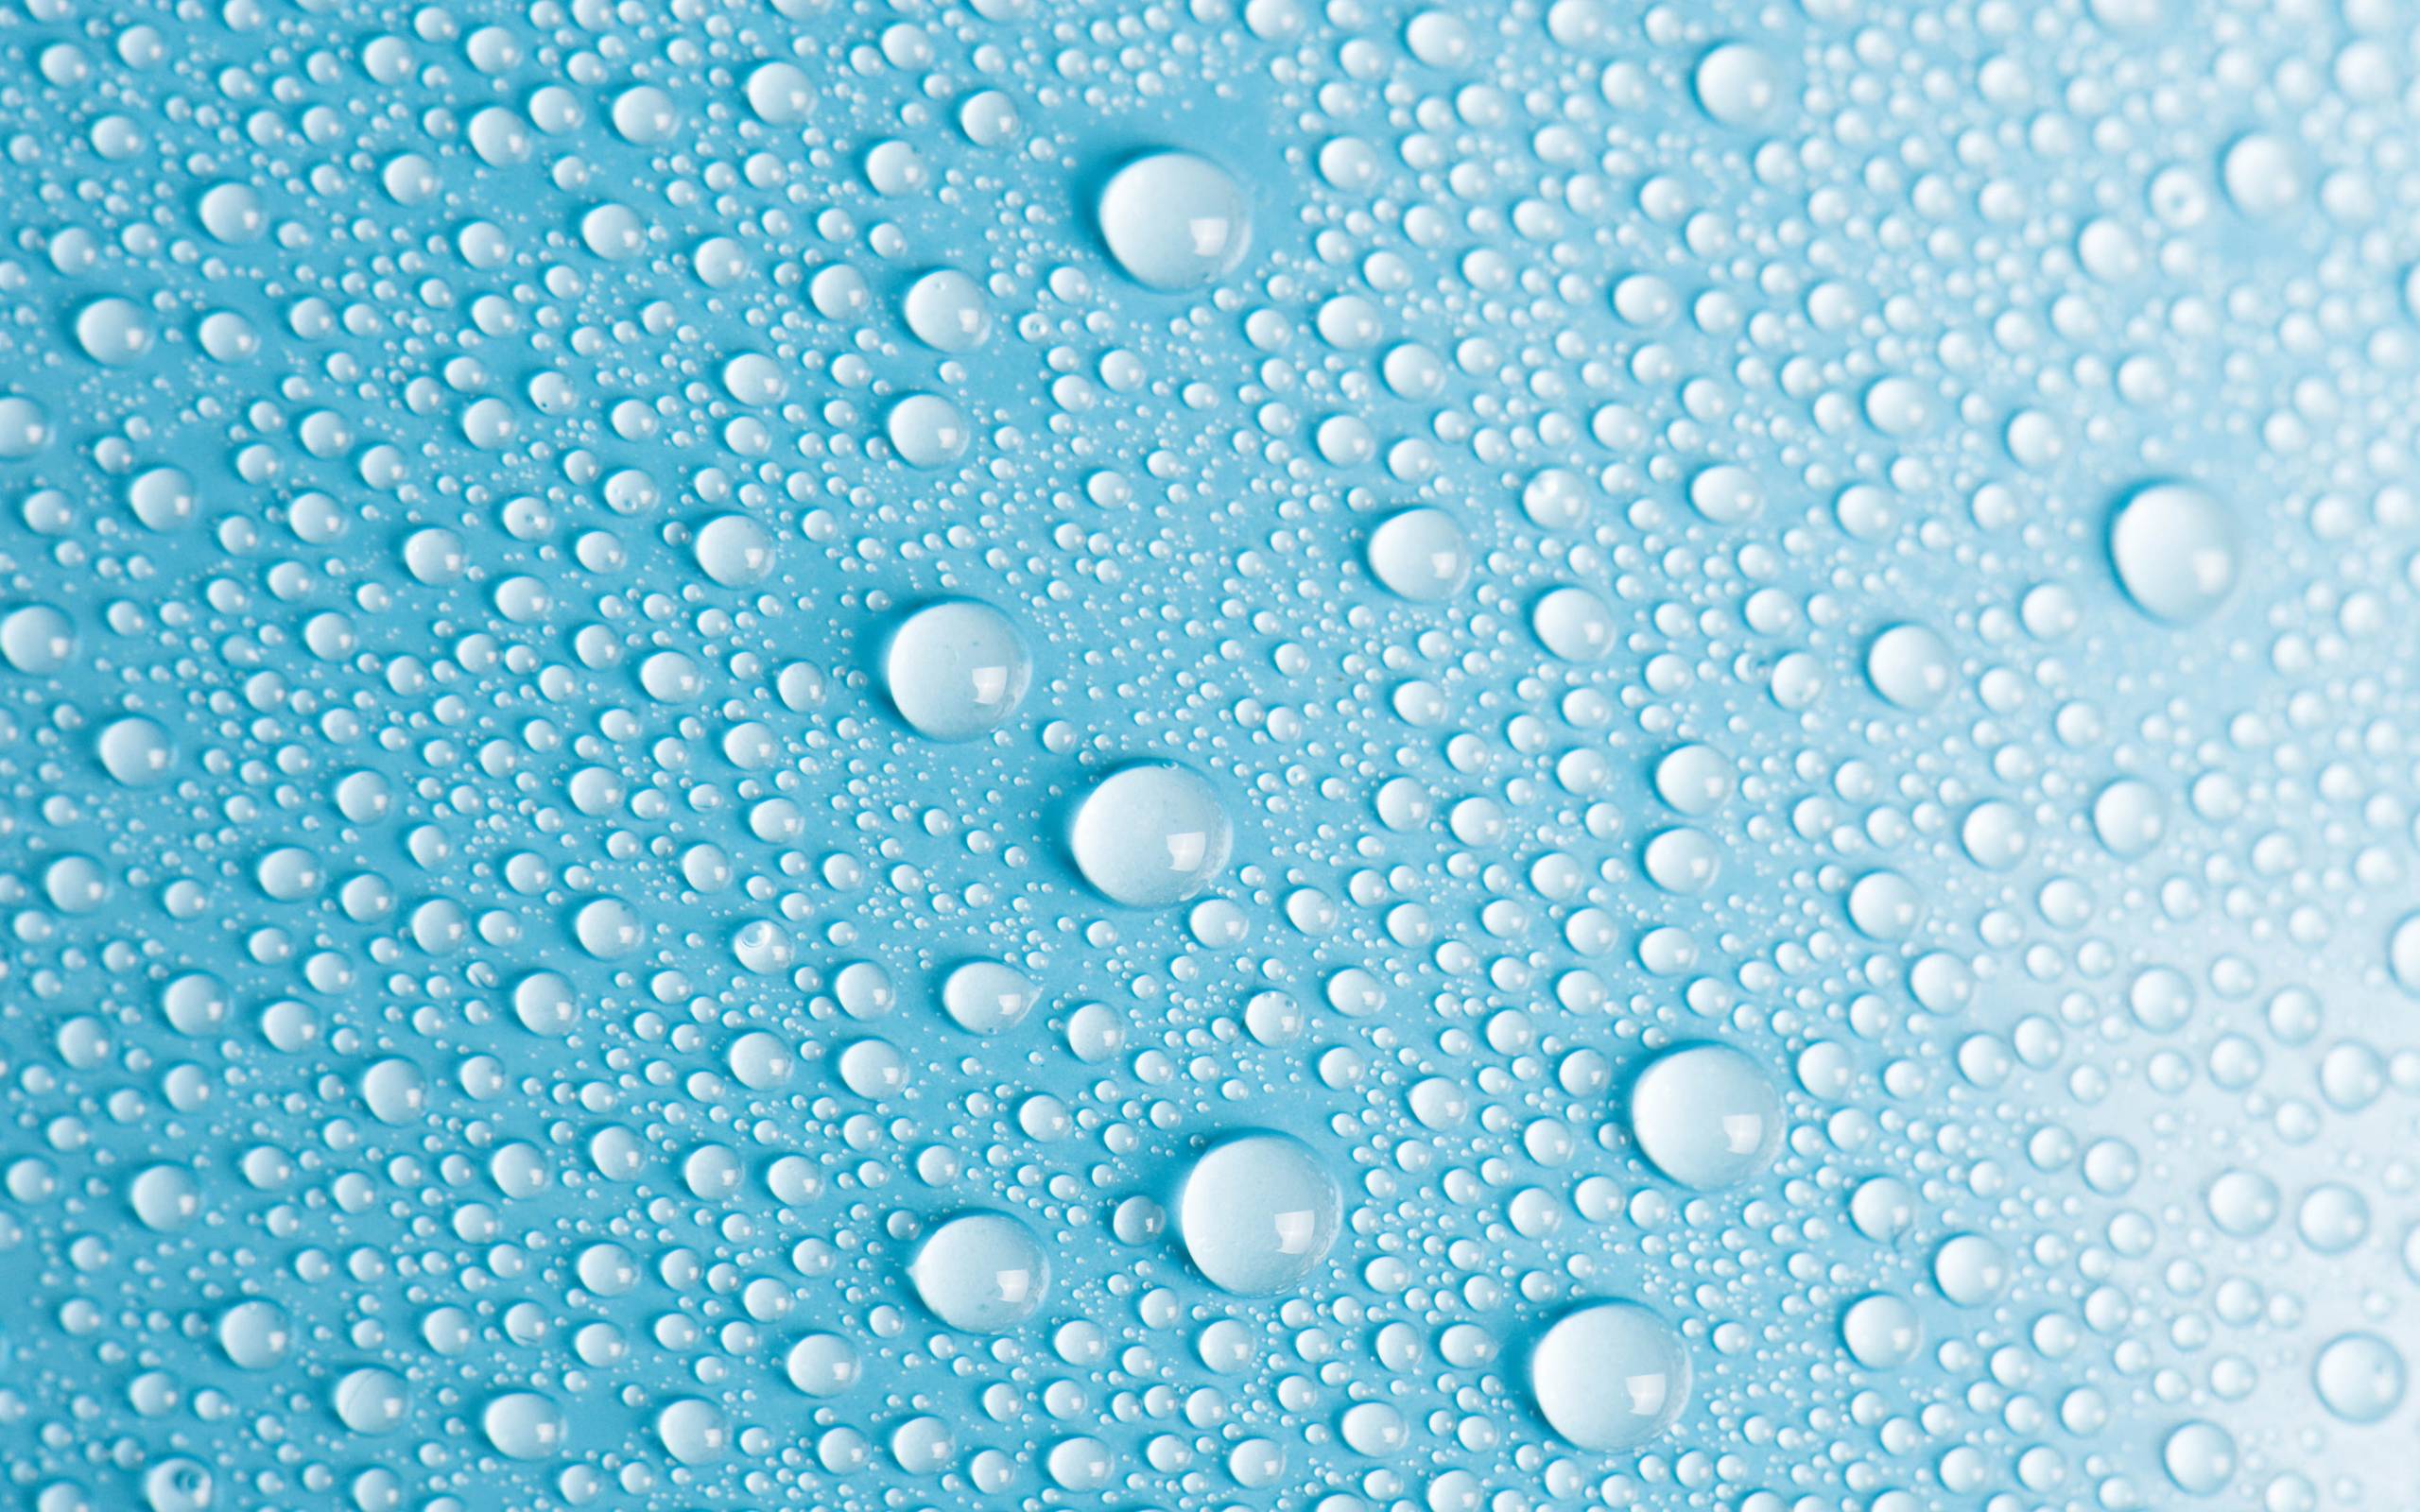 Water Droplets Backgrounds